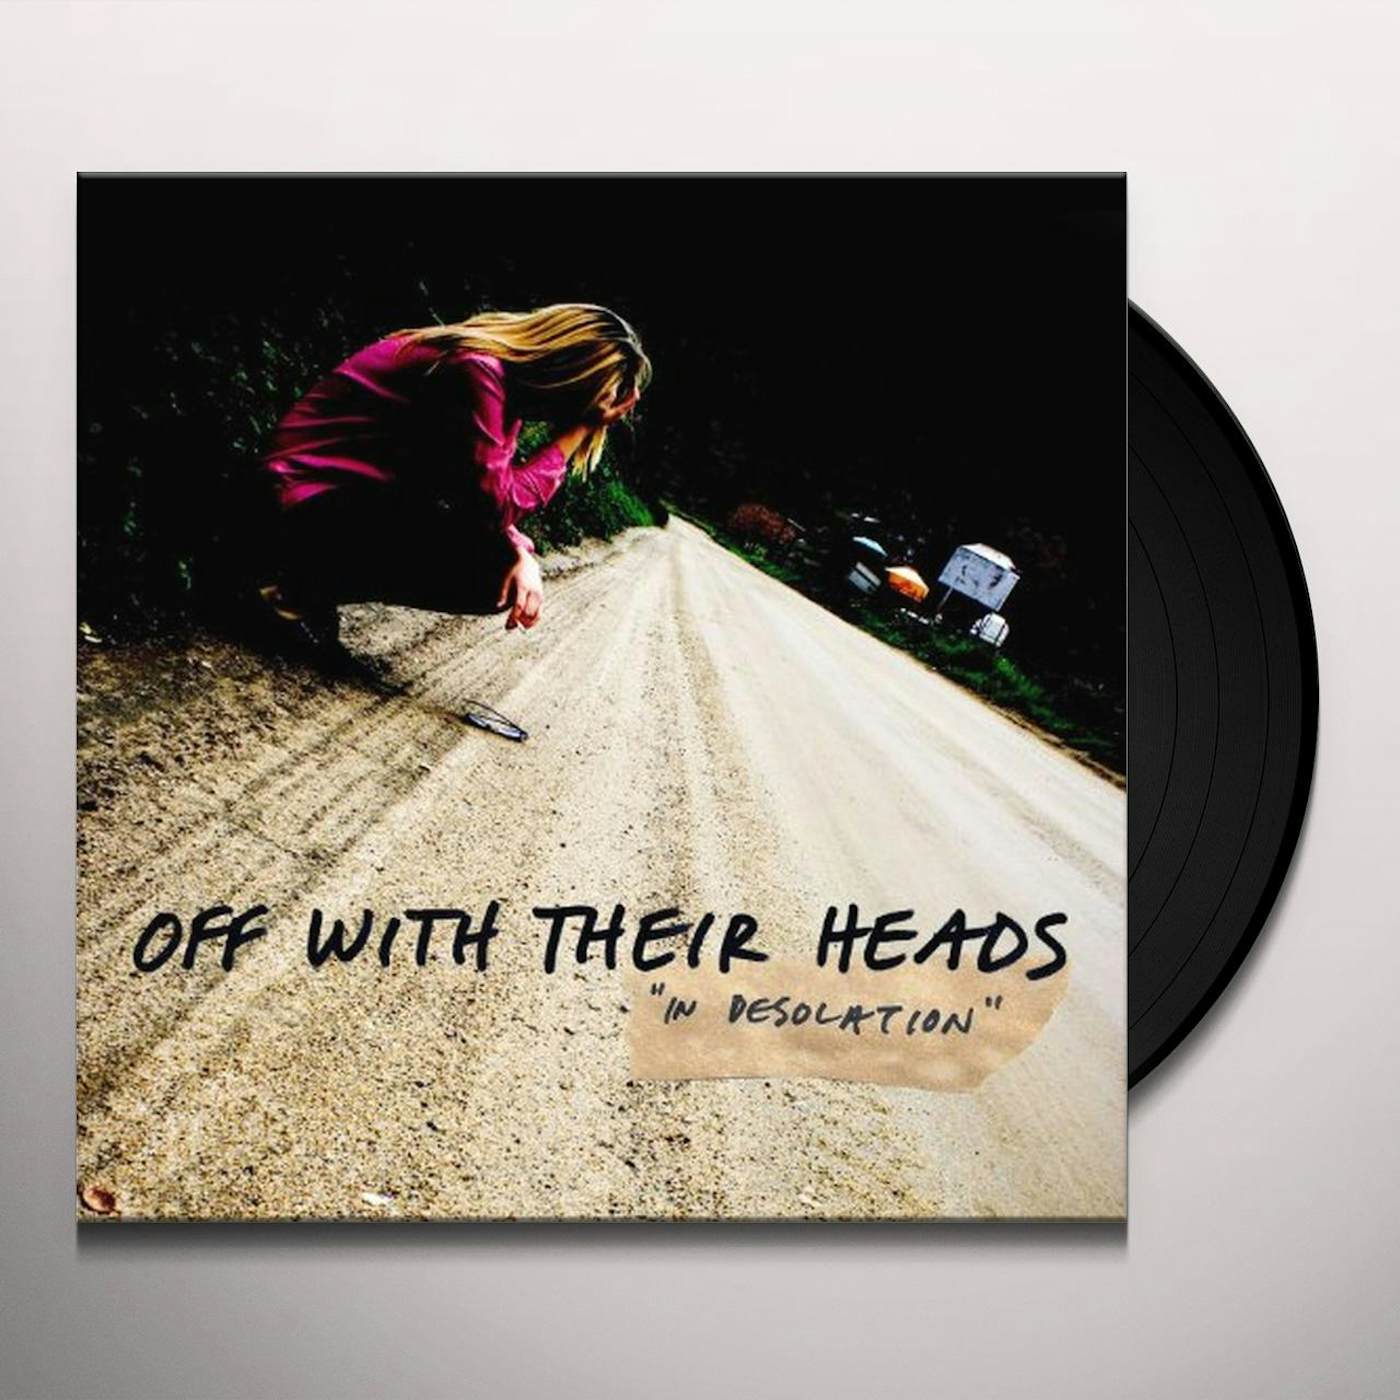 Off With Their Heads In Desolation Vinyl Record